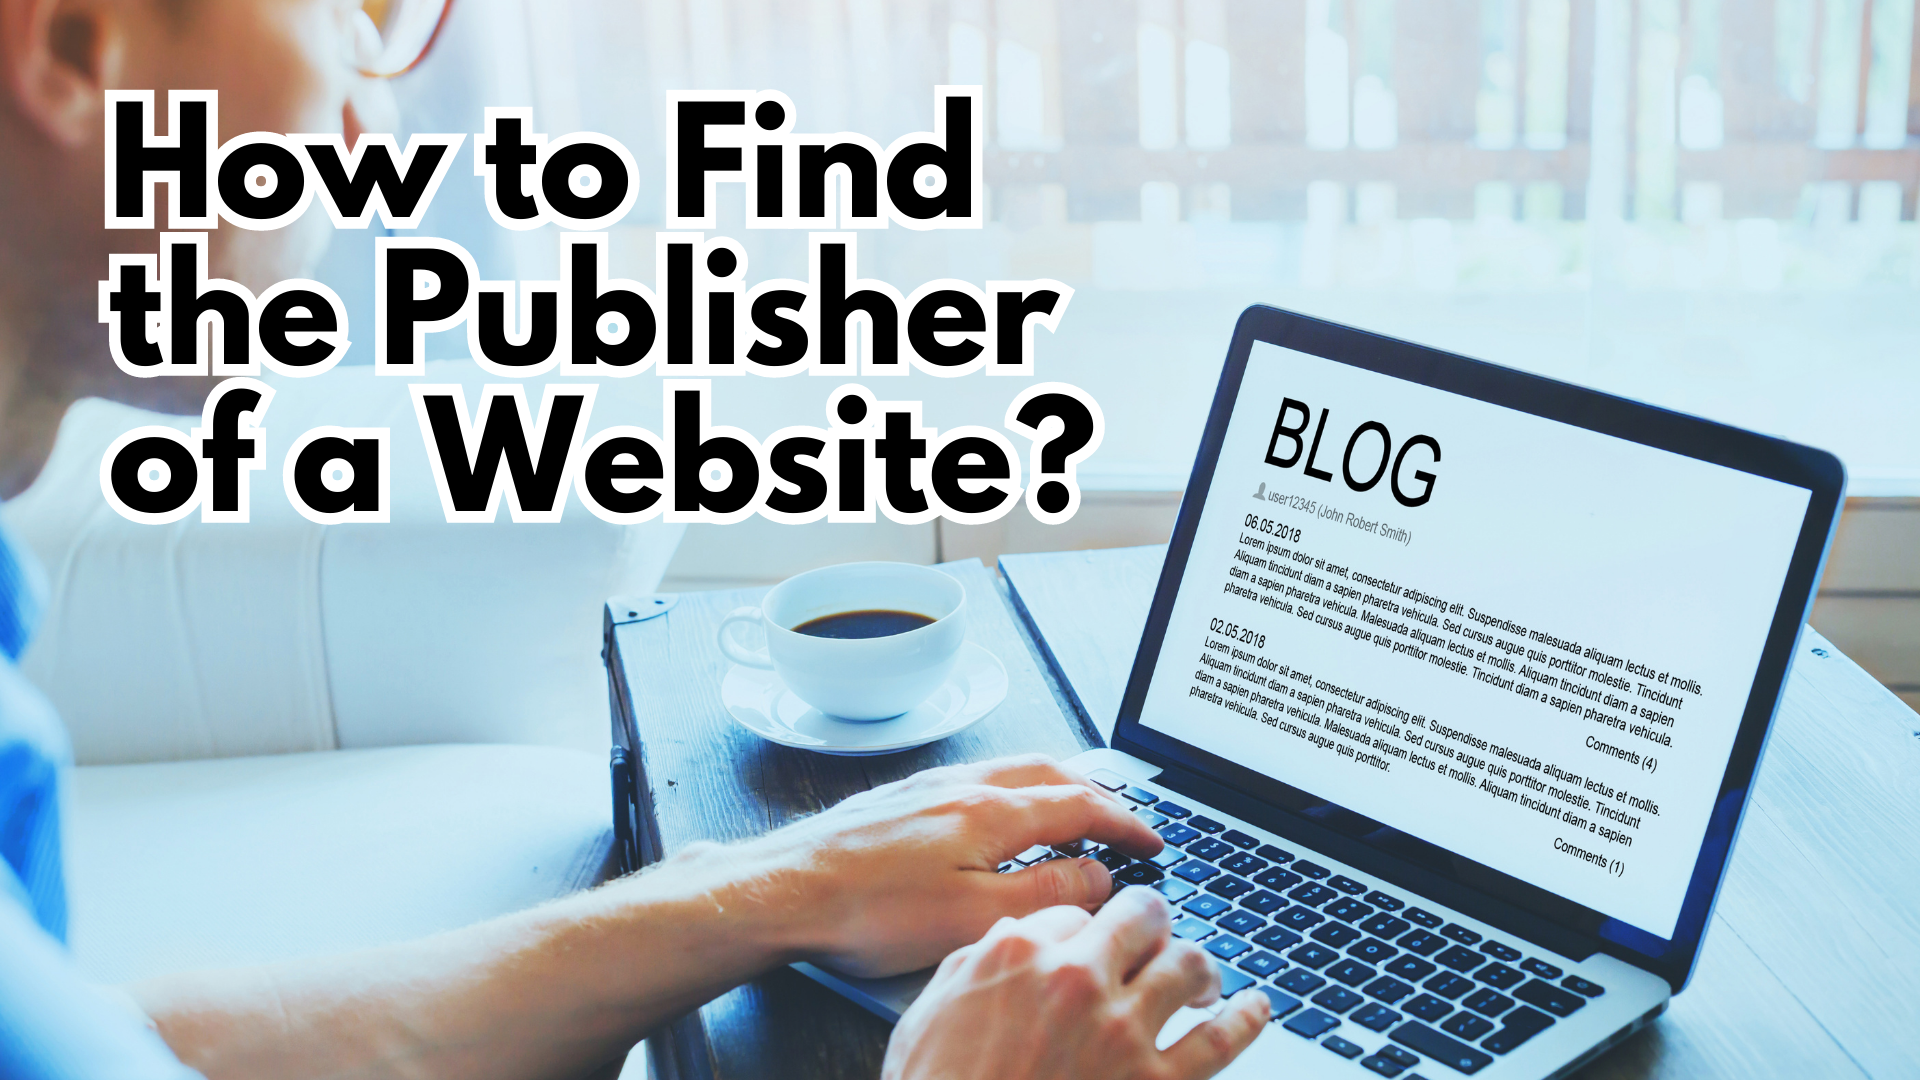 How to Find the Publisher of a Website?